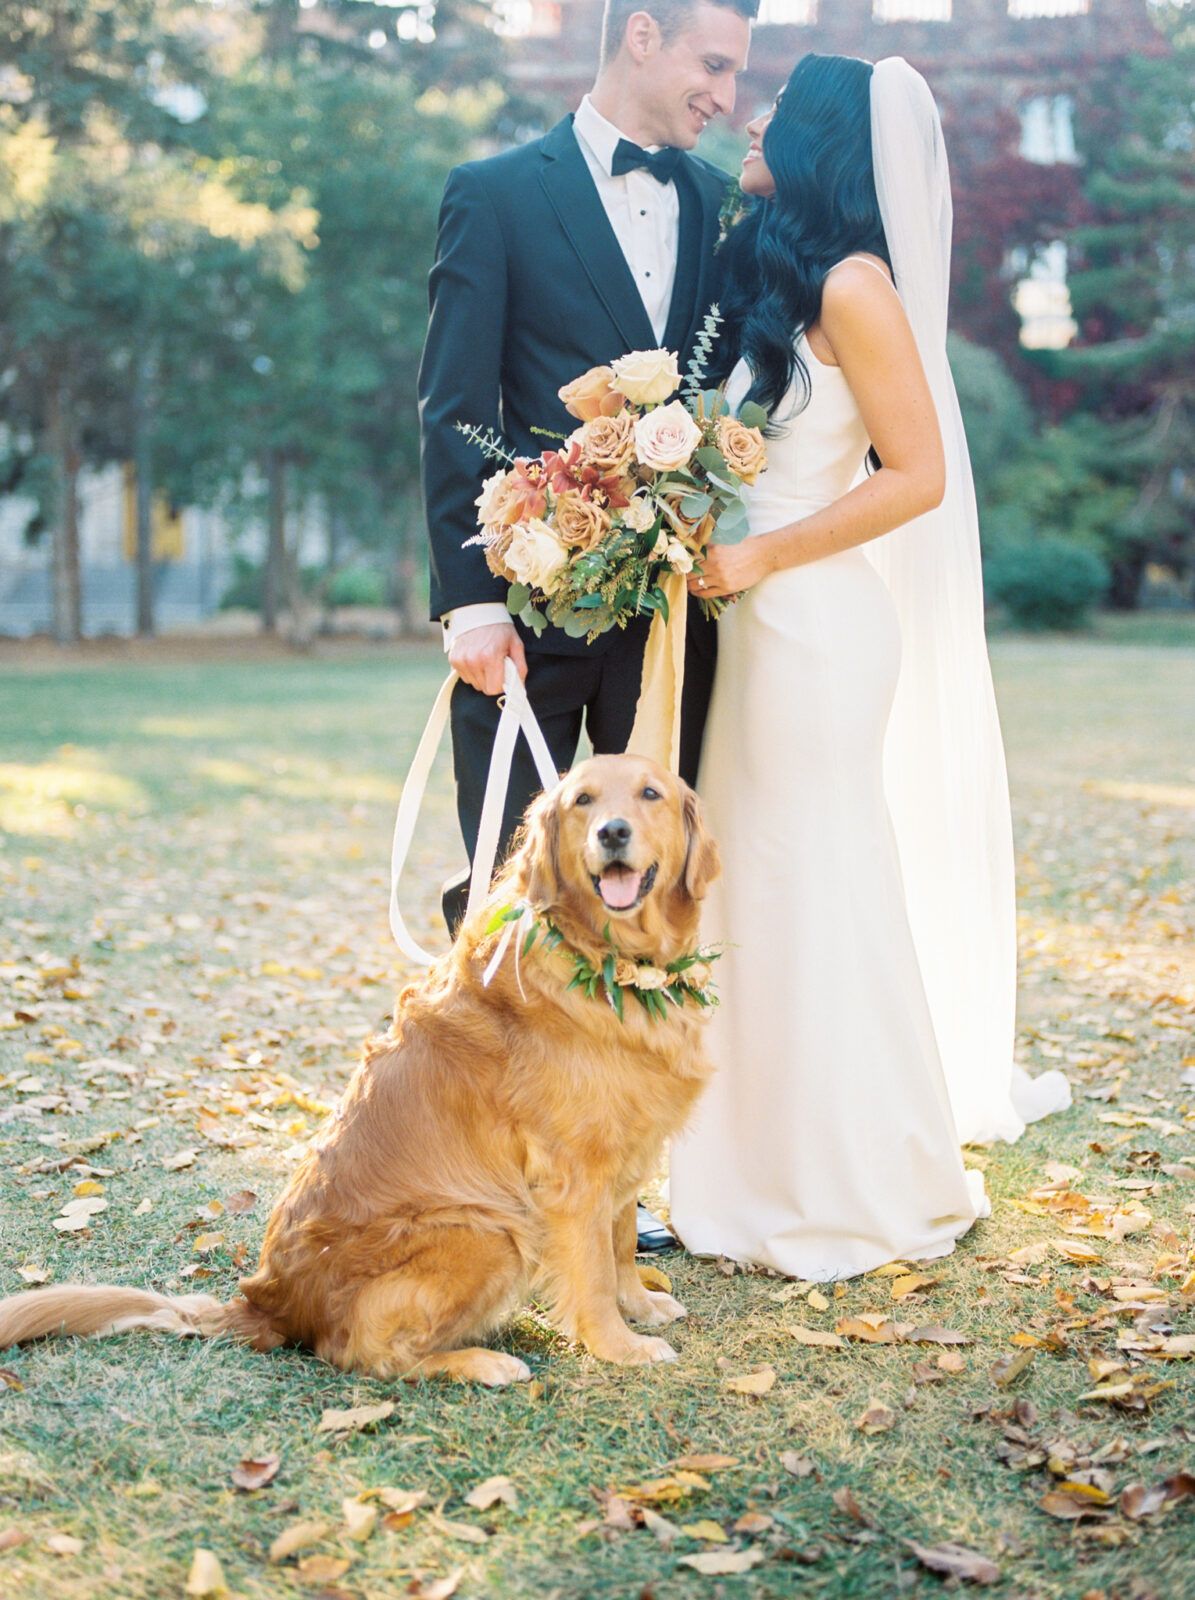 unforgettable bride and groom wedding portraits with their dog, golden hour photo ideas with pets, floral collar on dog to match bride's bouquet in fall hues 